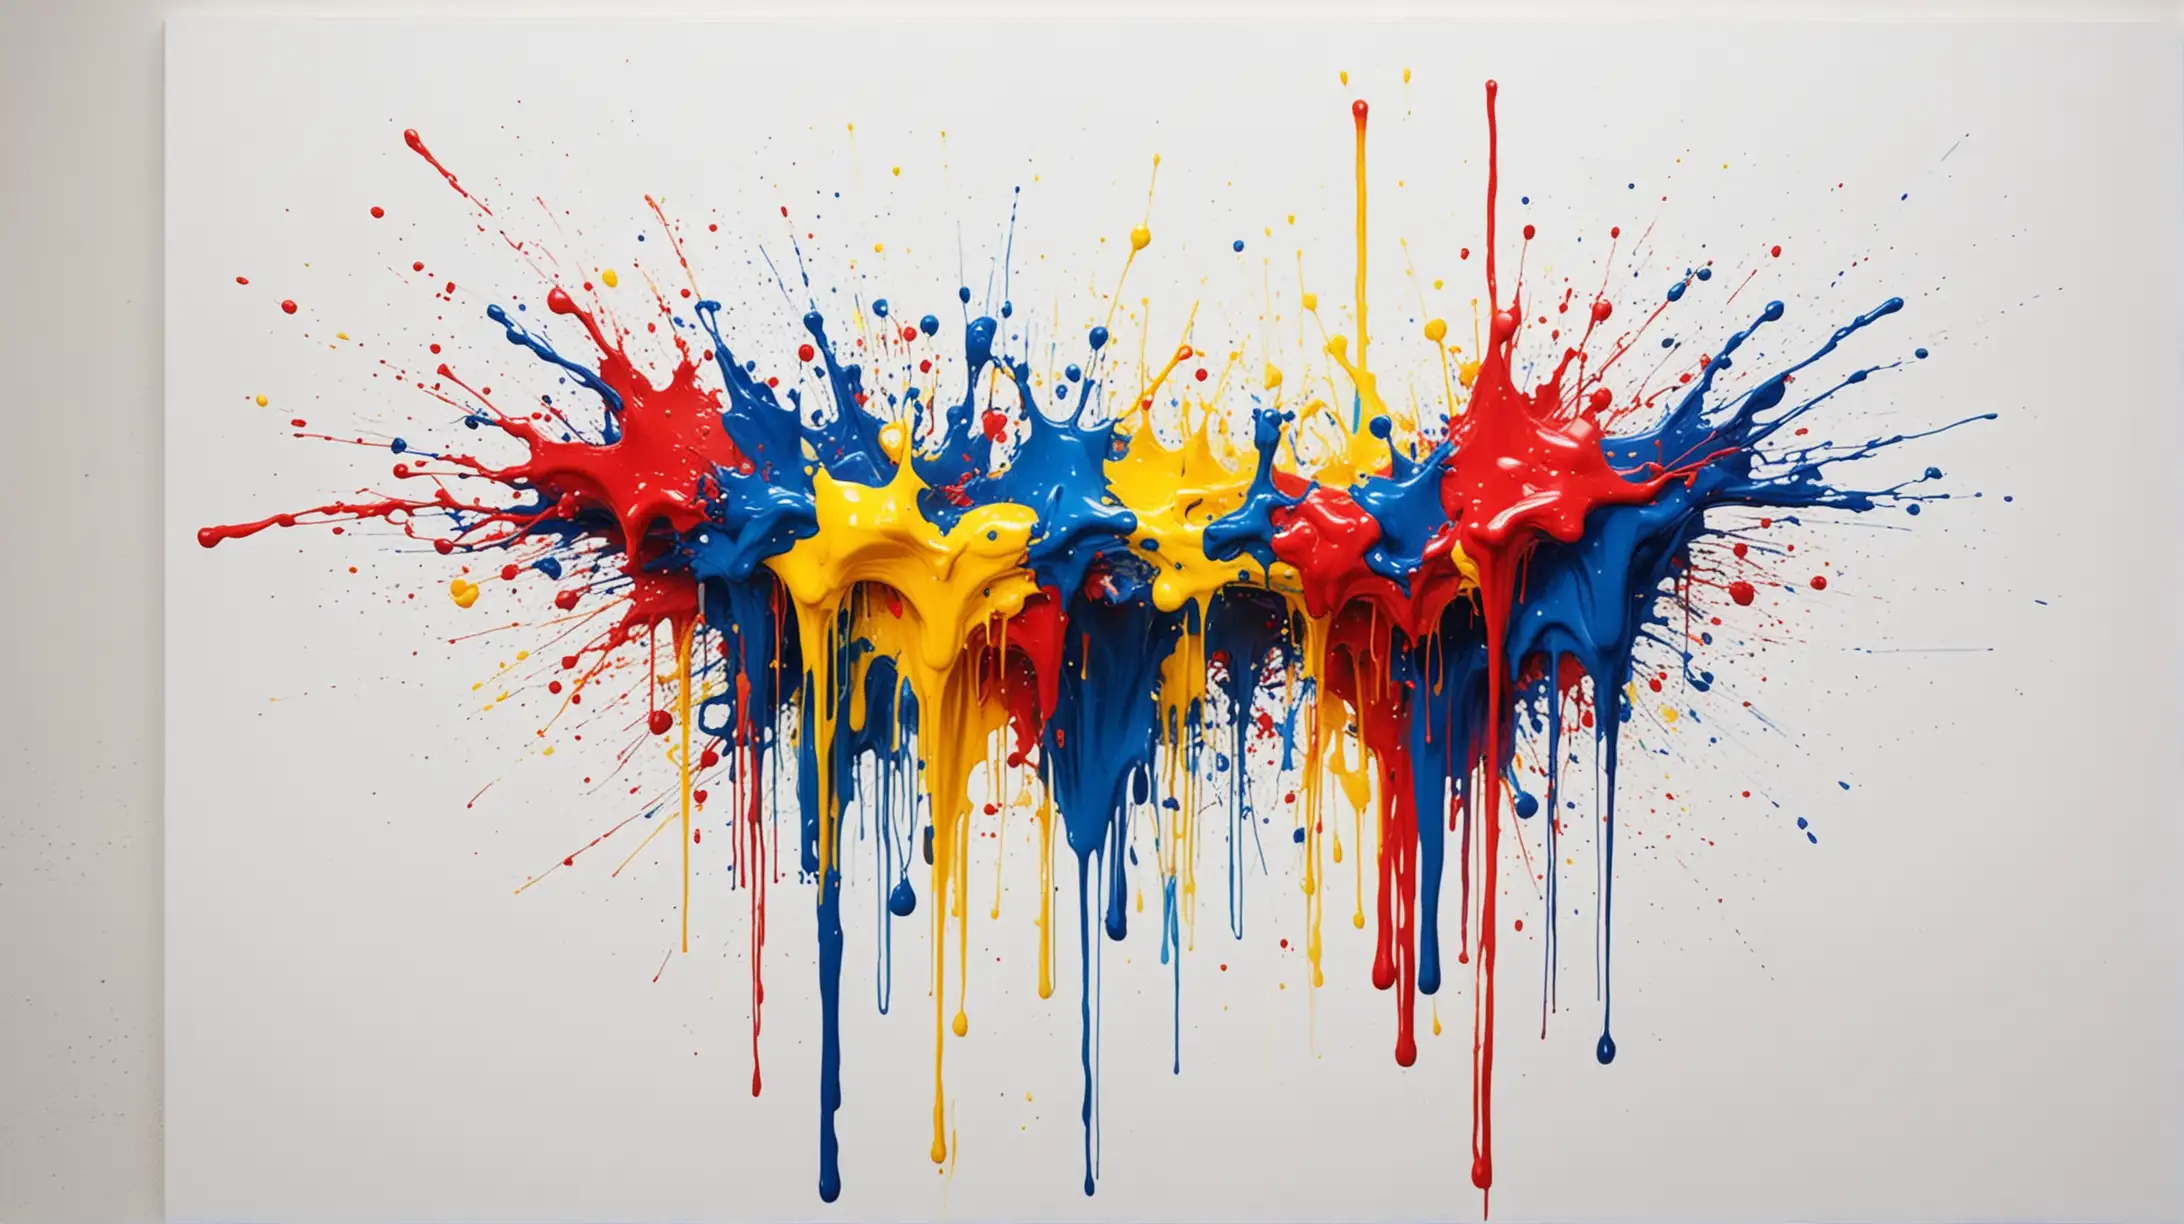 Create an abstract painting of a splash of primary colors on a white back round that has along dripping effect